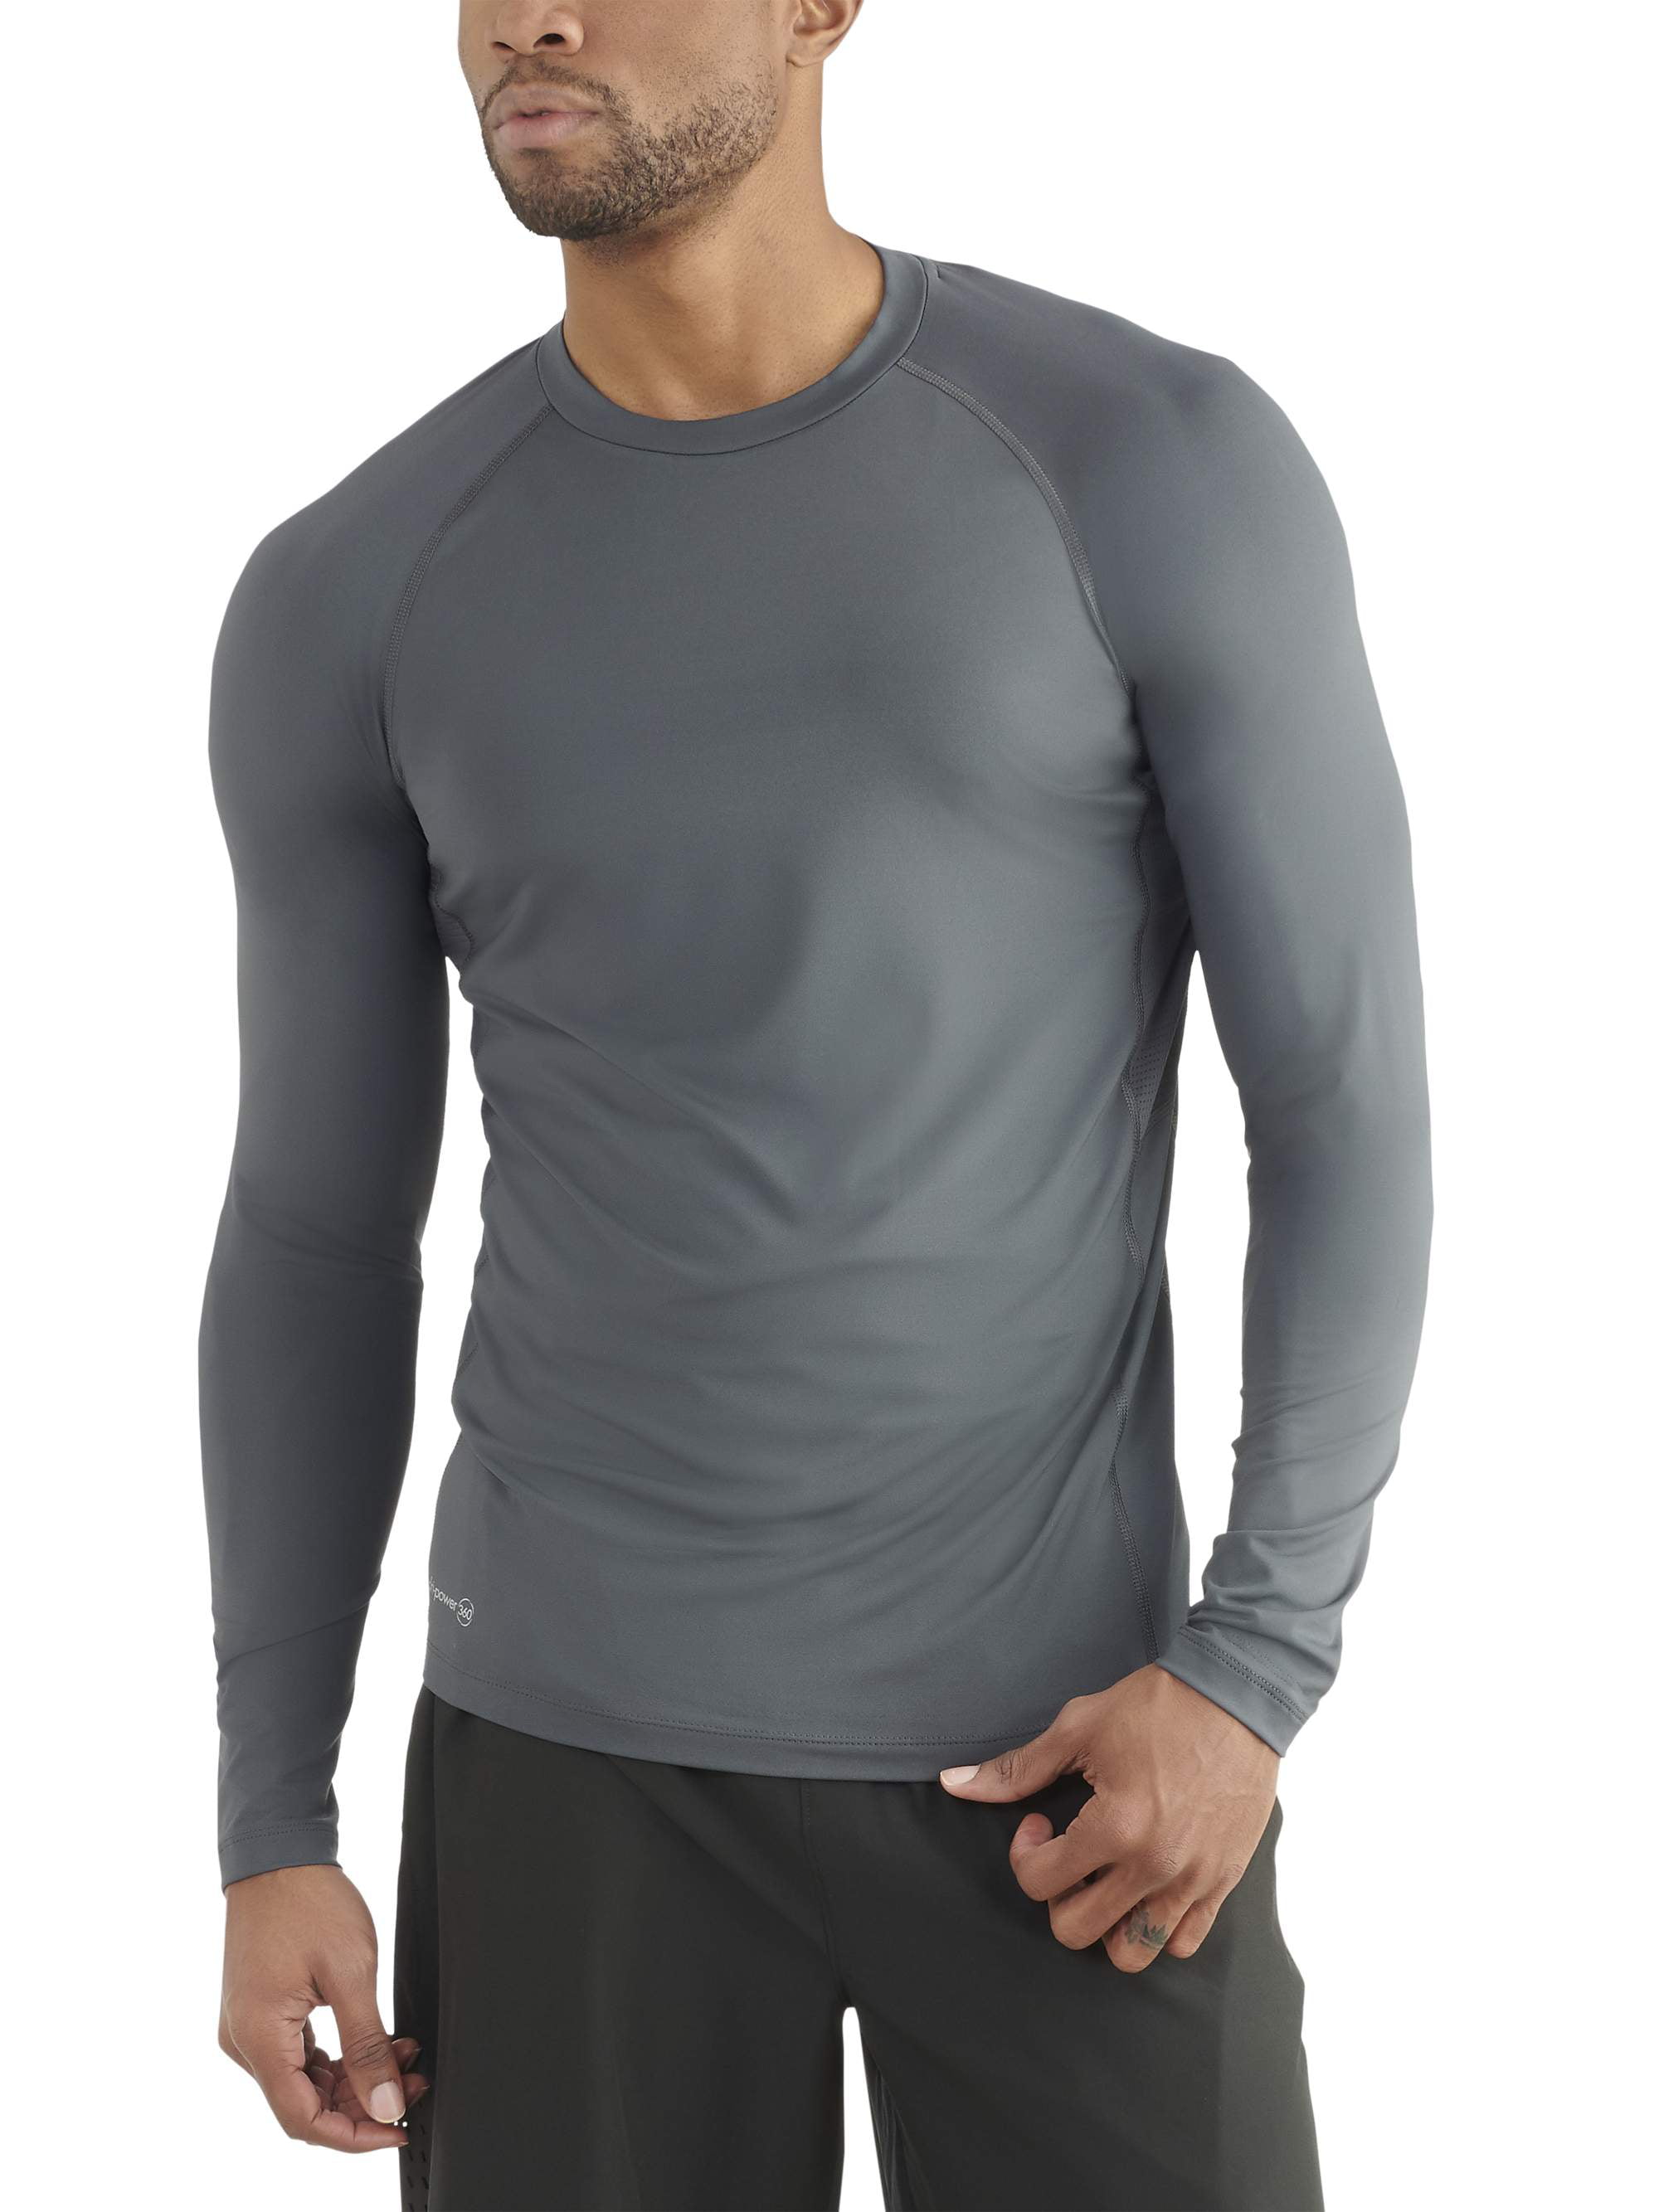 russell compression shirt